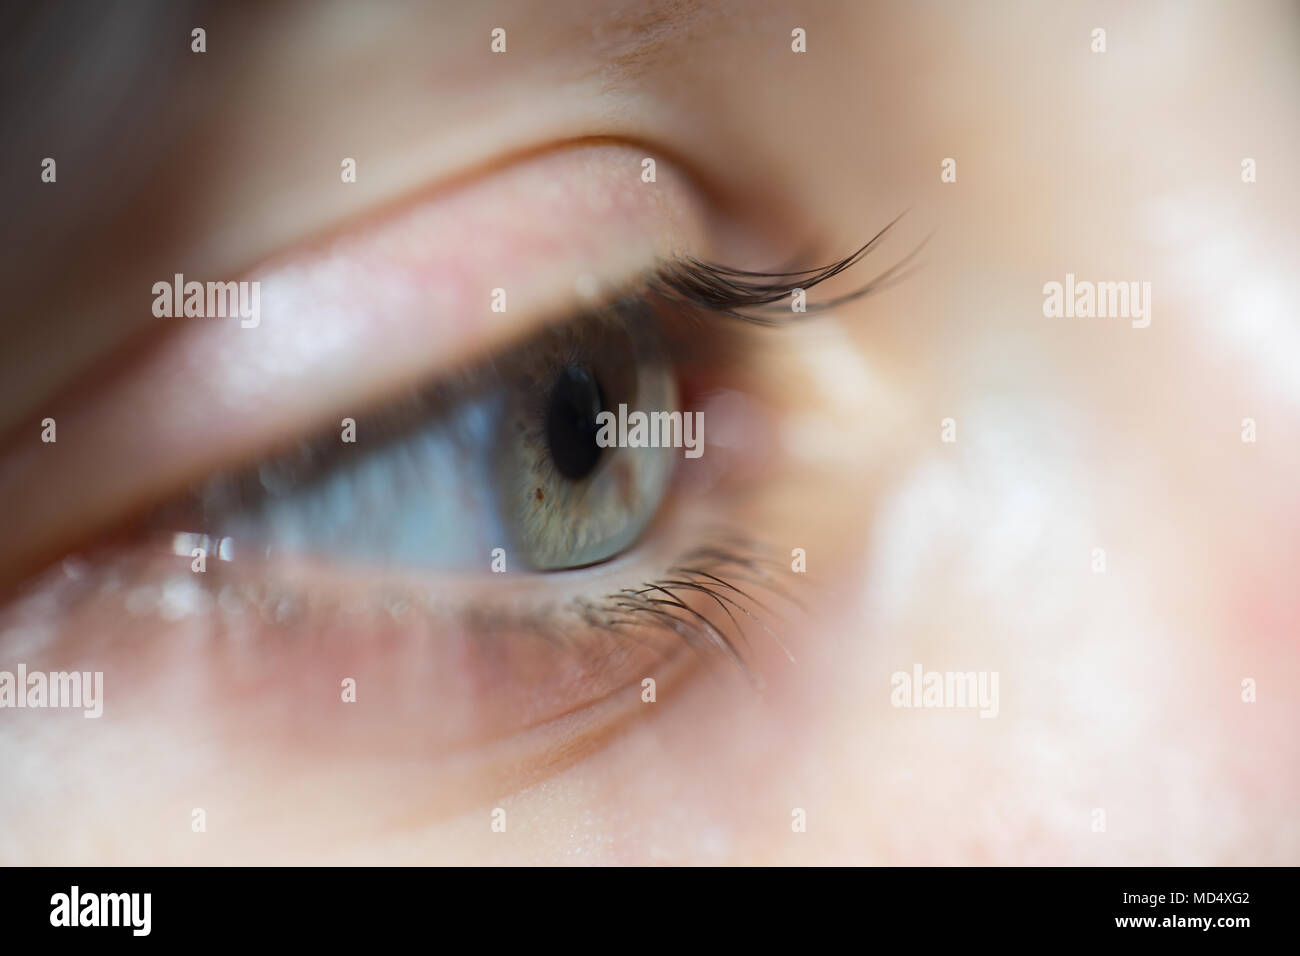 Close-Up Of Woman With Blue Eyes And Long Eyelashes Looking Away In Sadness Stock Photo